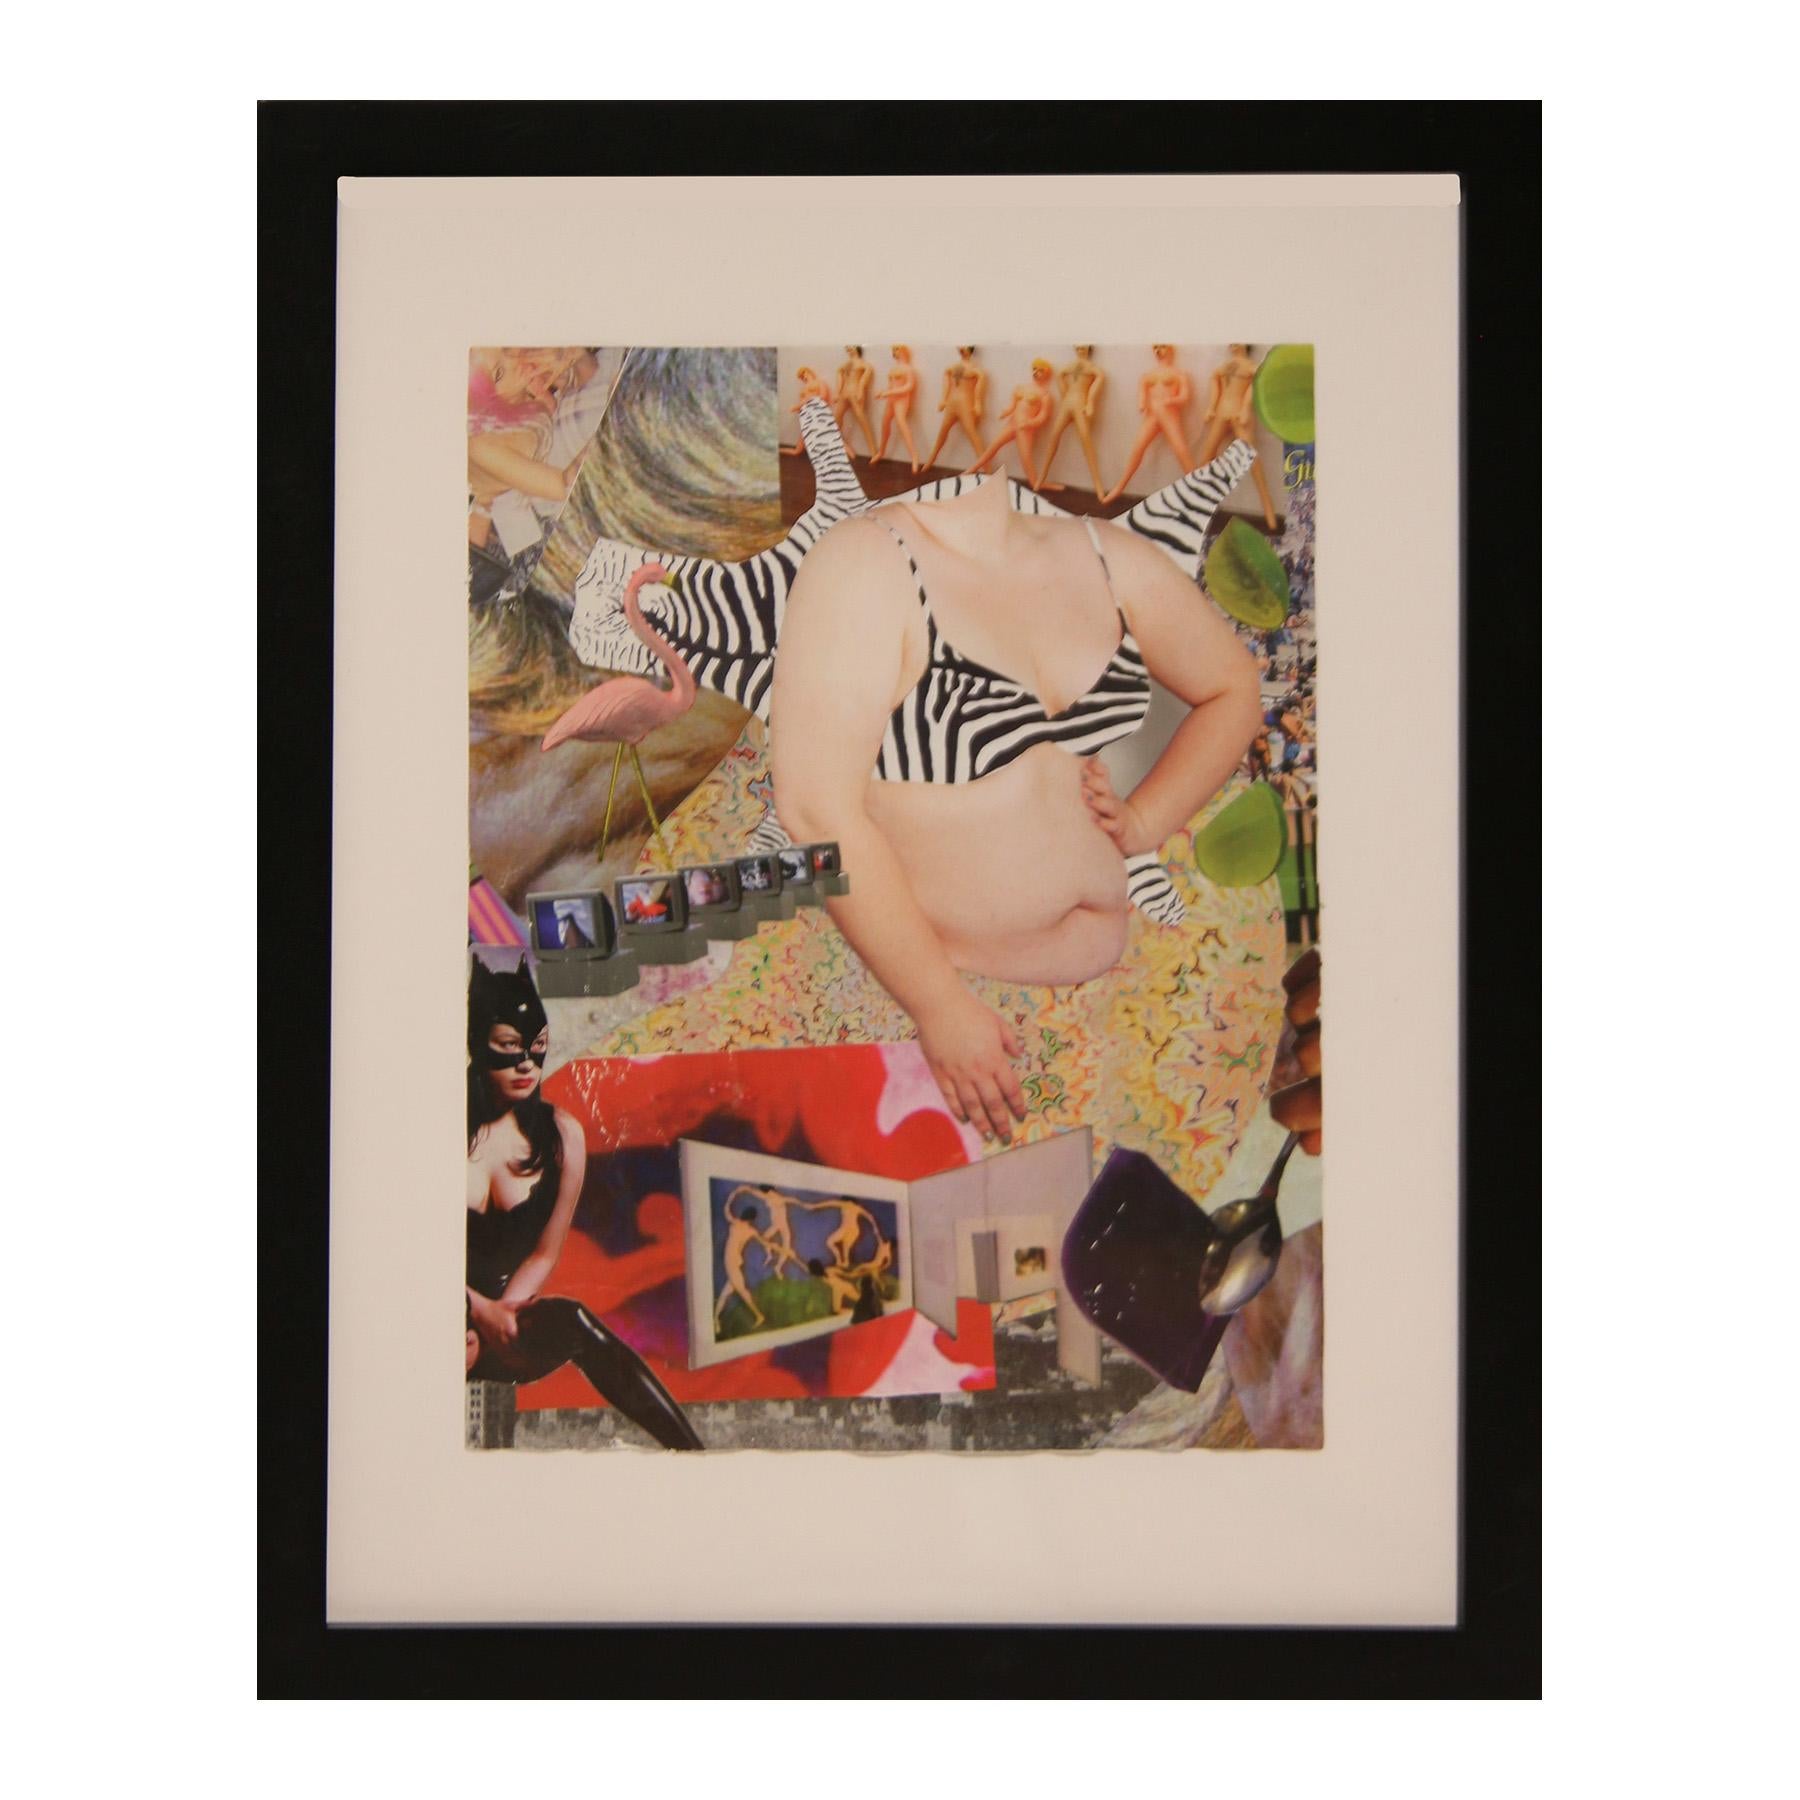 Colorful Abstract Contemporary “Sexy Fat” Nude Female Collage - Art by Julia Rossel